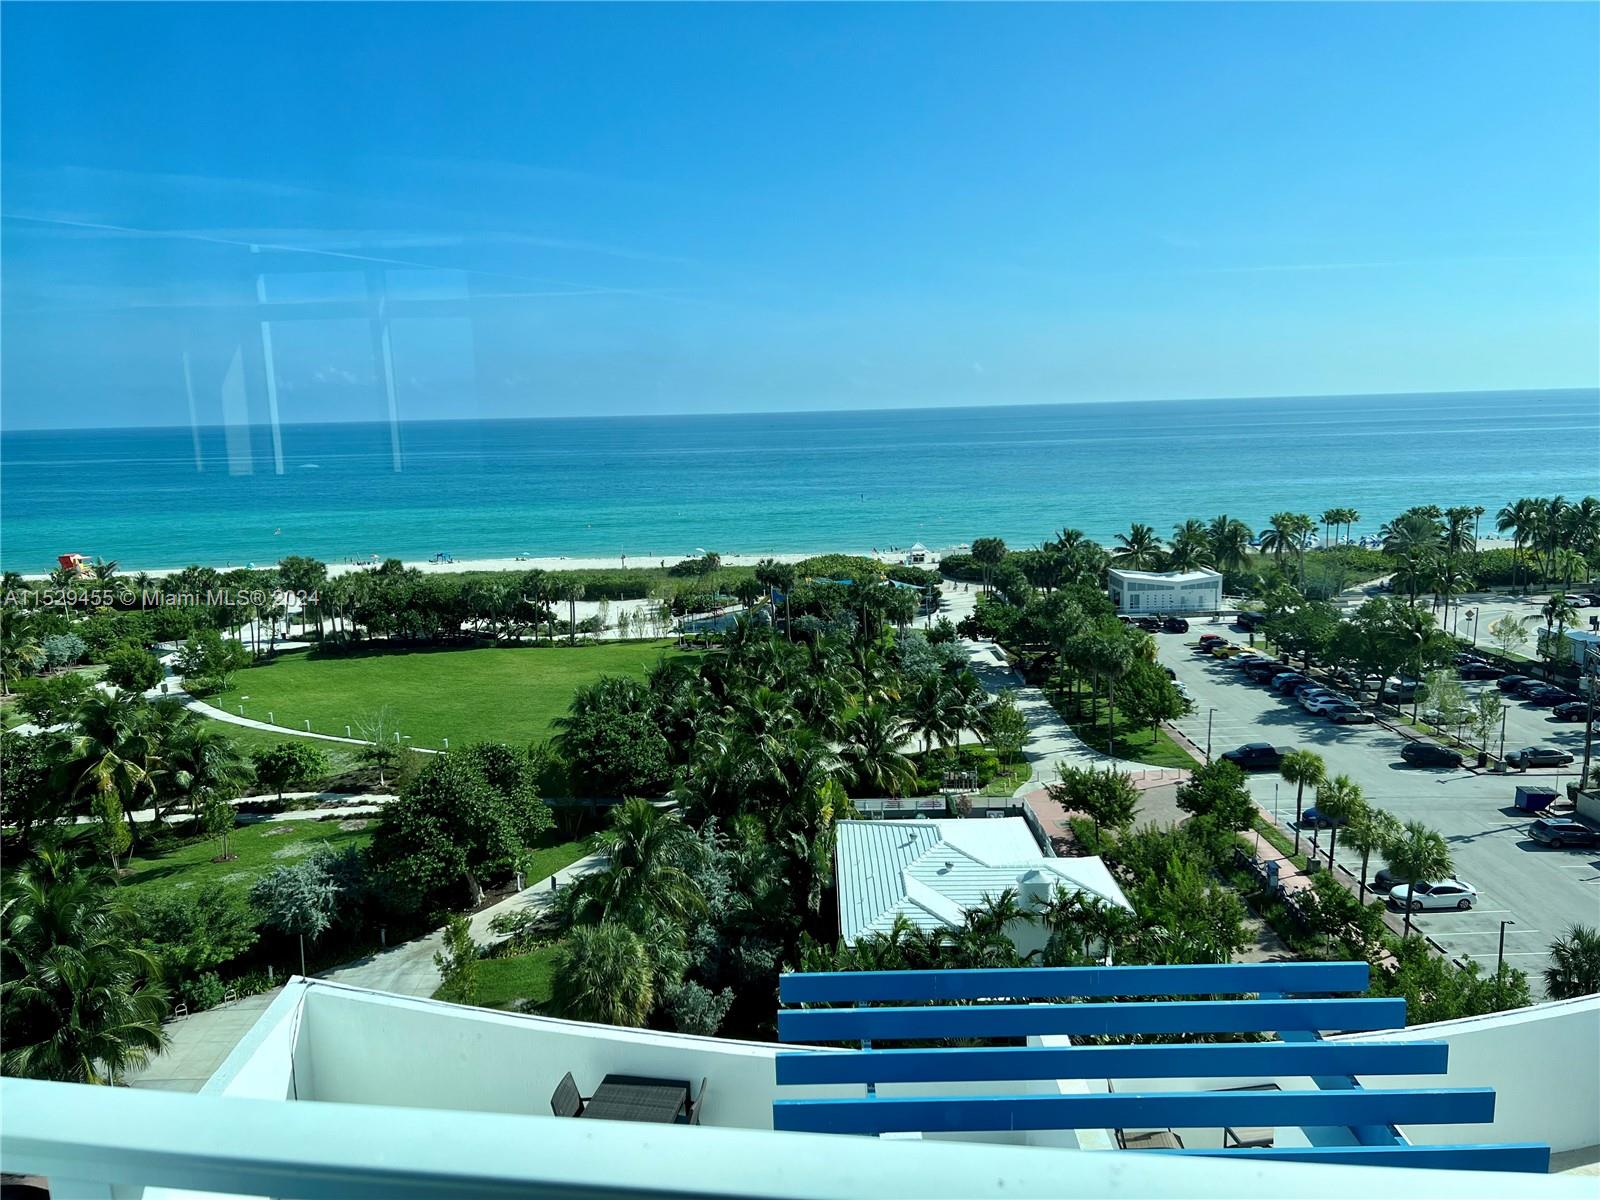 THIS PENTHOUSE IS AVAILABLE FOR MONTH-TO-MONTH RENTAL. ALL UTILITIES INCLUDED. Enjoy spectacular direct ocean views from this 2-Floor loft style furnished apartment. The 16' front windows will have you seeing the beach and the beautiful Altos Del Mar Park. Walk 5 minutes across the beach and enjoy the sun & fun of Miami Beach. There's shopping and restaurants right down the block. When you stay in Oceanbue you enjoy the quiet beach life in North Beach, while being only a short car ride to South Beach. This rental has everything you will need, just bring a toothbrush and unpack your clothes and start a relaxing vacation. The 2nd bedroom has been coverted to a den, and there is a pullout sofa in the living room. 30 day minimun rentals only. Call me for more information.